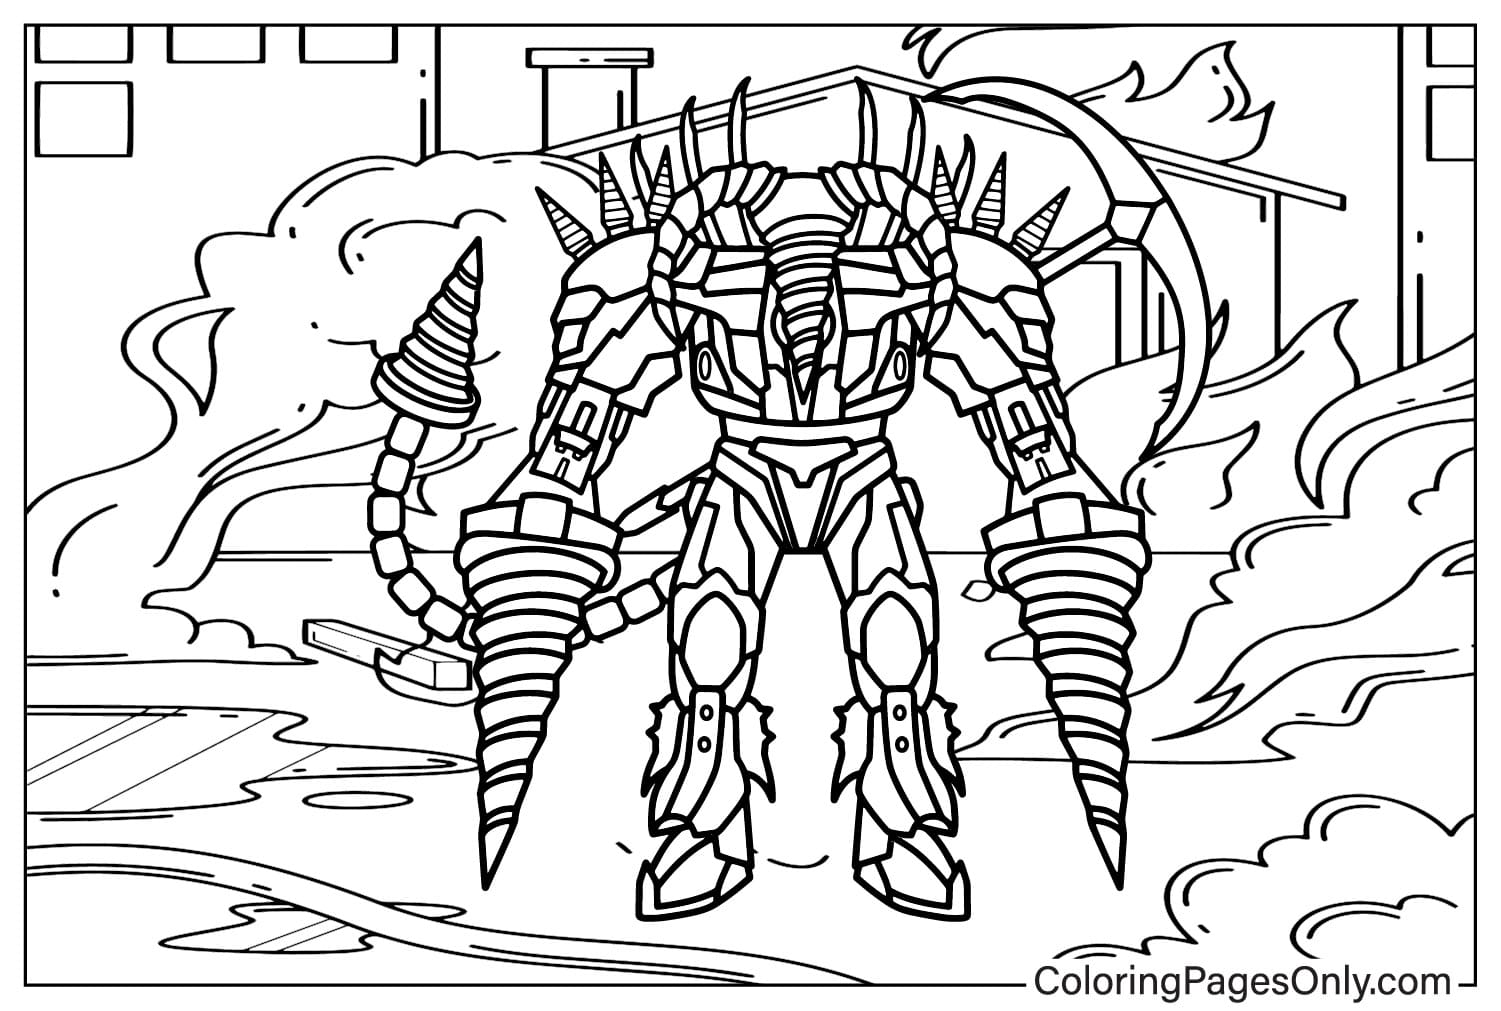 Upgraded Titan Drill Man Coloring Page Free from Upgraded Titan Drill Man